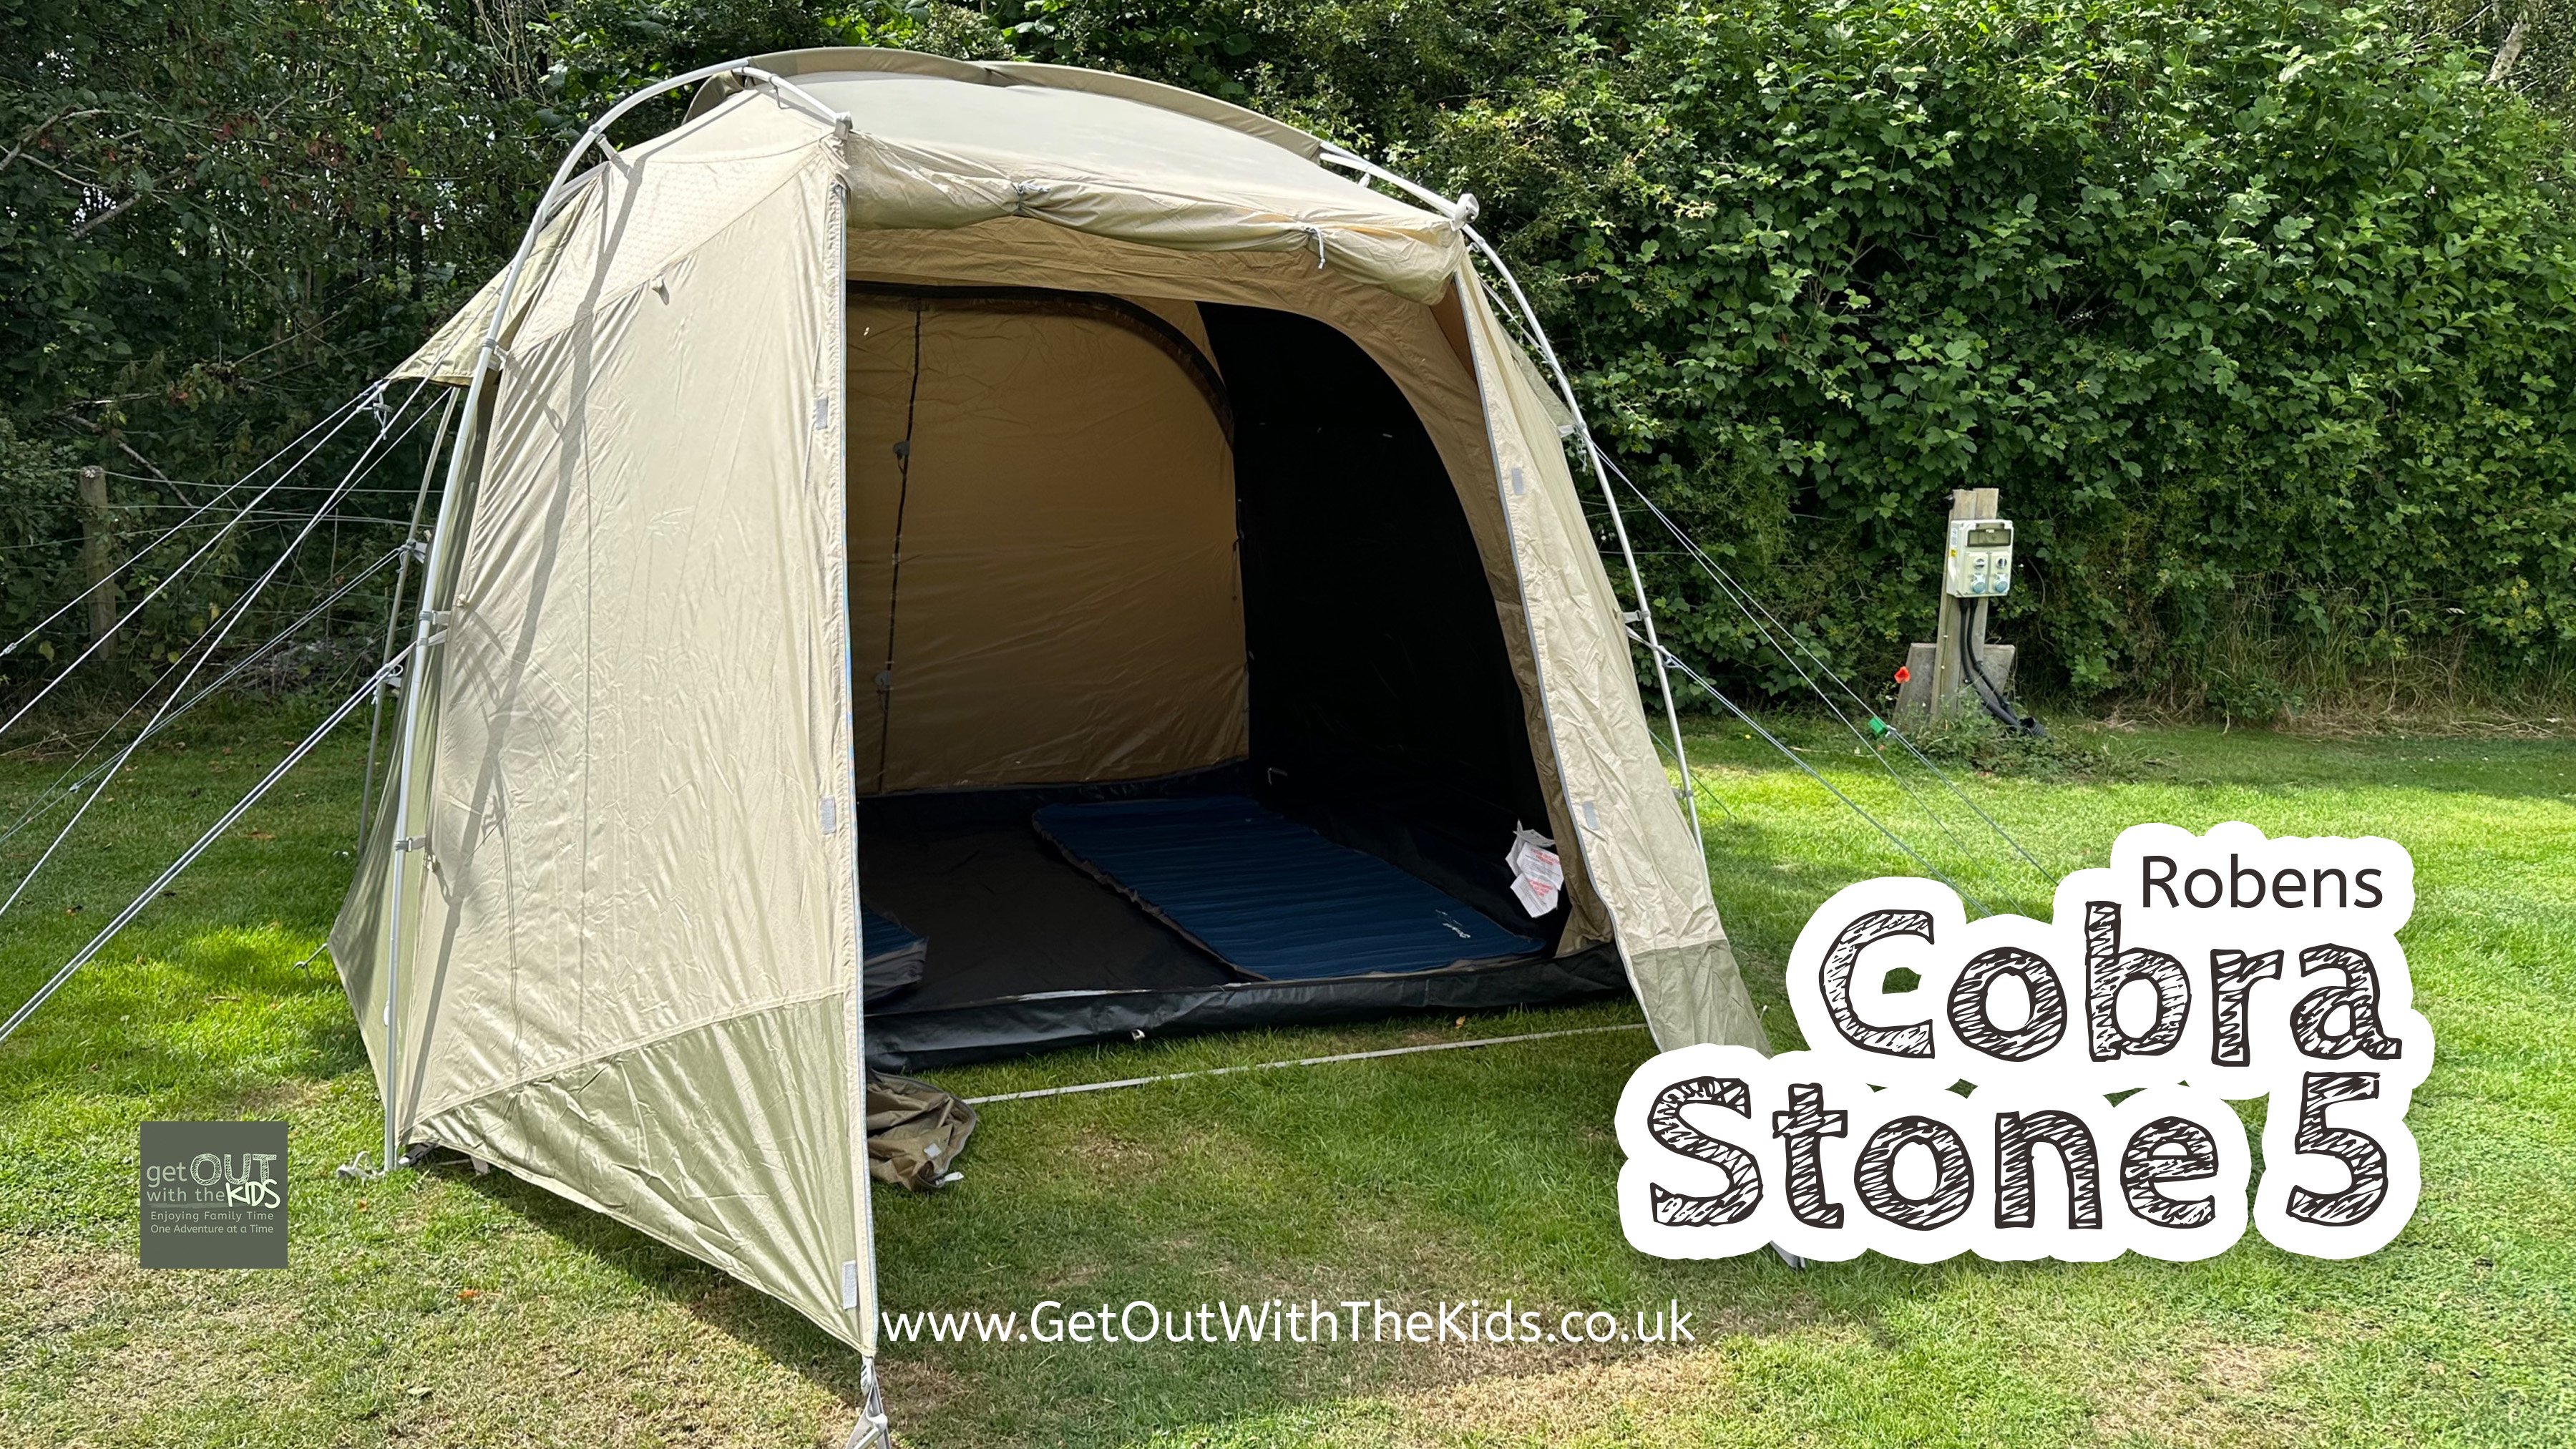 Robens Cobra Stone 5 tent pitched at the campsite